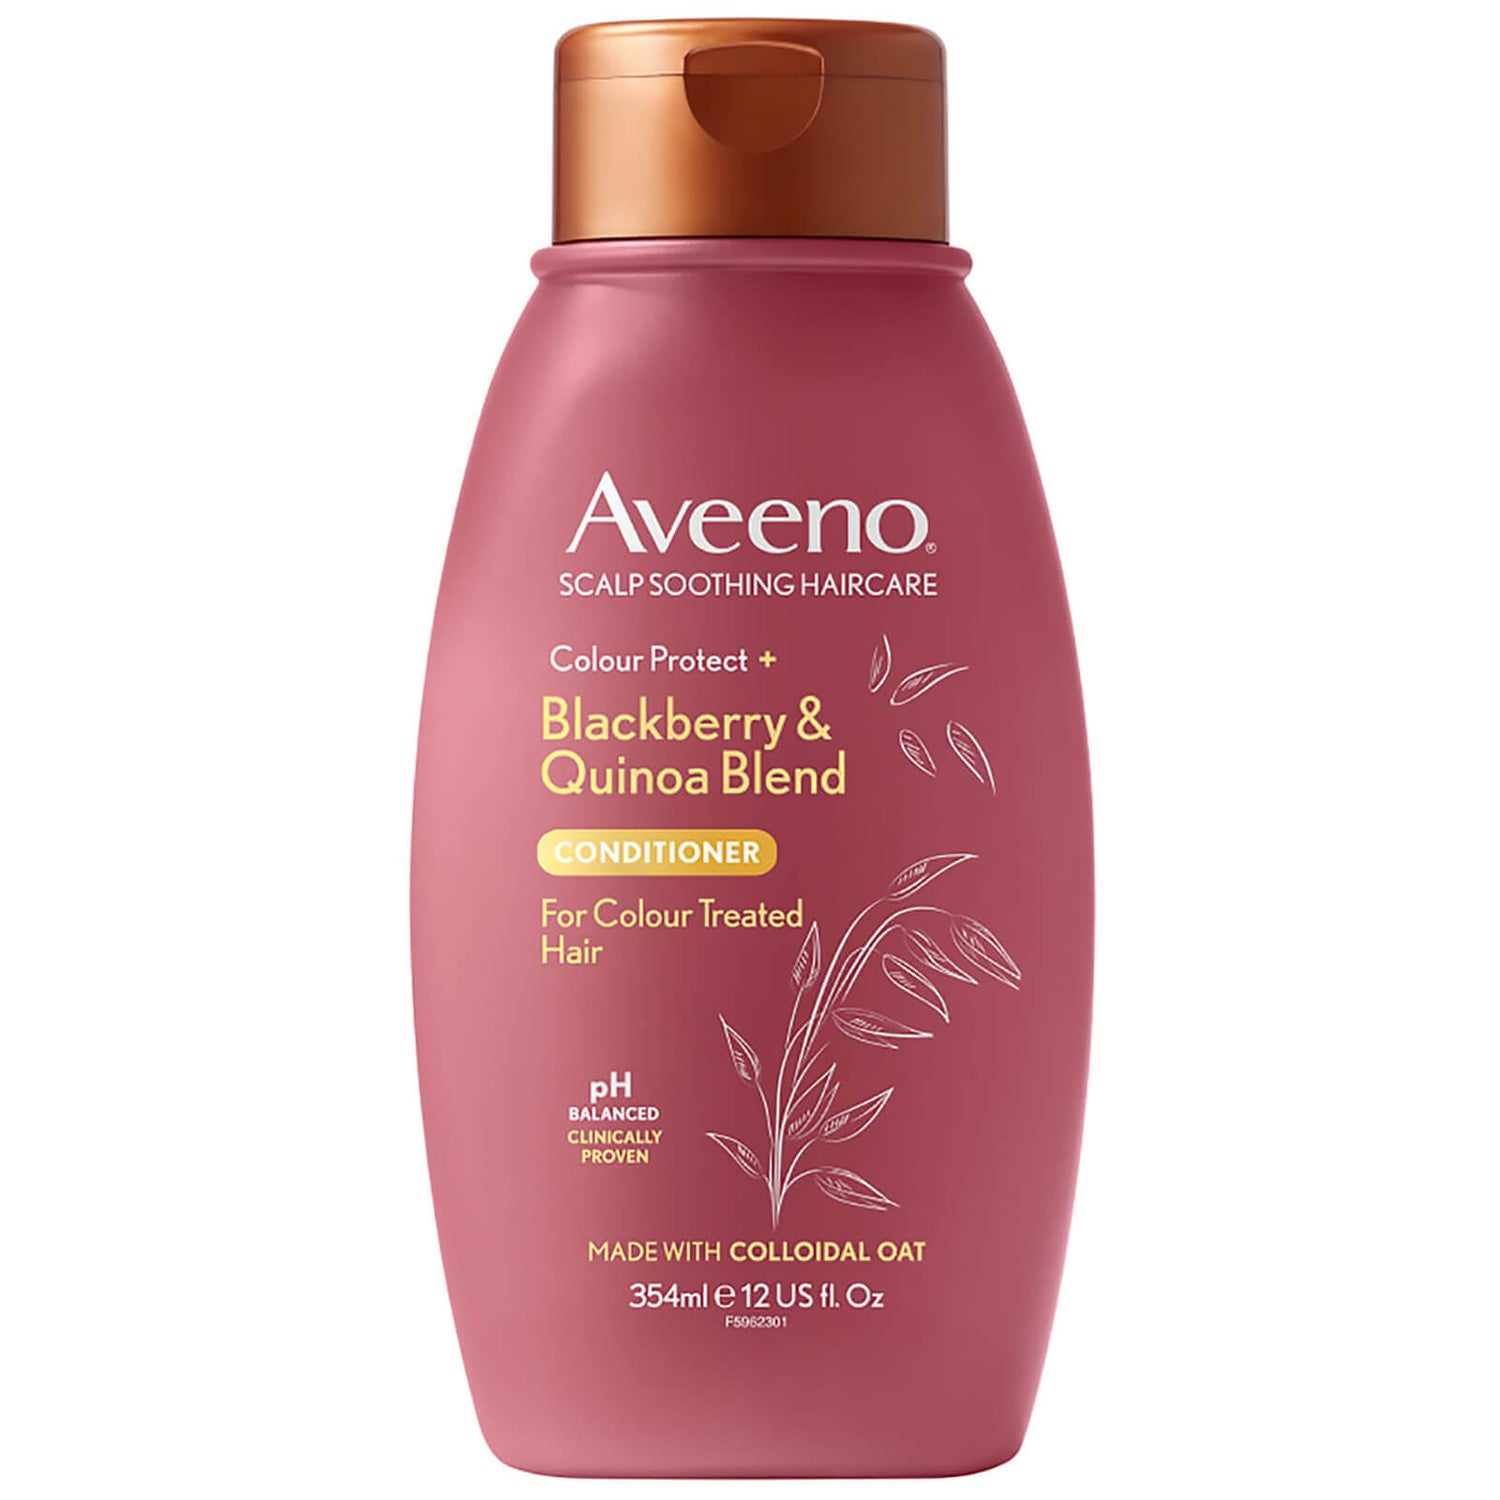 Aveeno Scalp Soothing Haircare Colour Protect Blackberry and Quinoa Conditioner 354ml